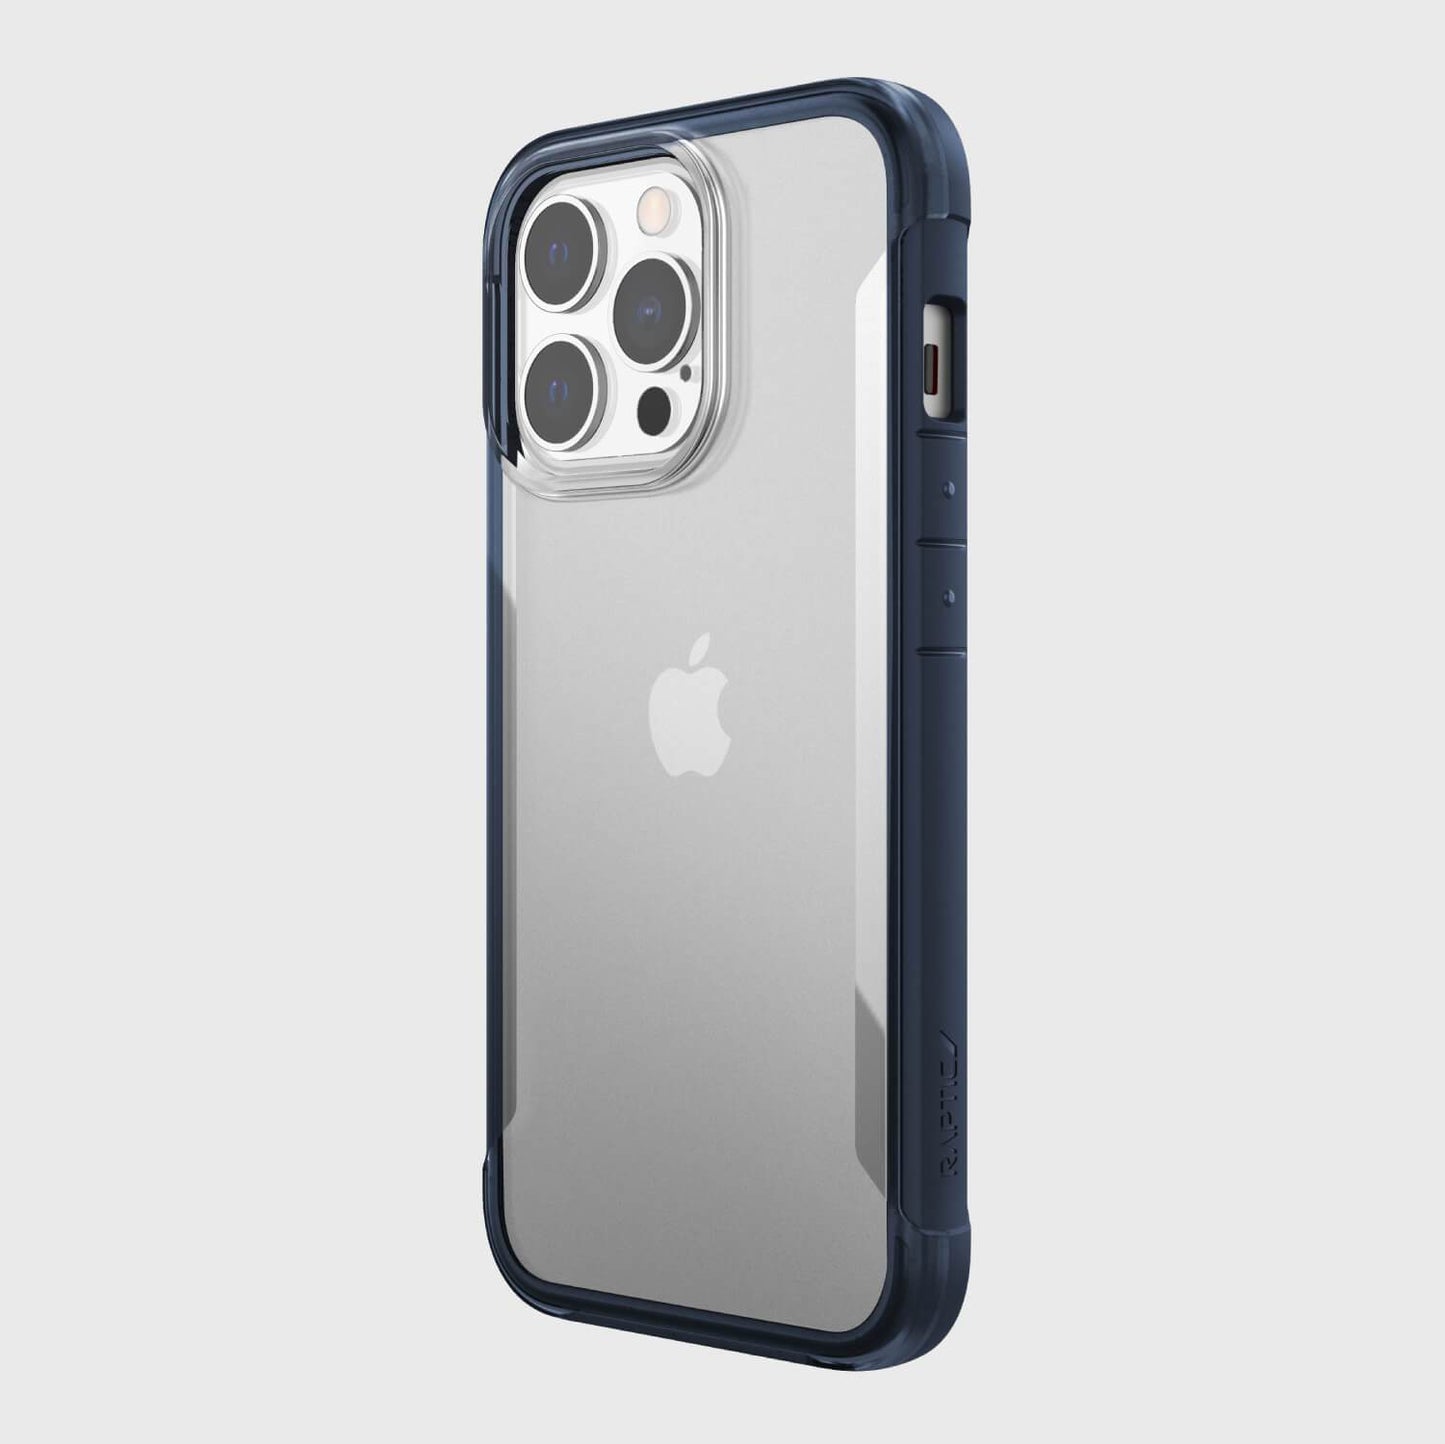 Showing an iPhone 13 Pro Max in a blue Raptic Terrain case